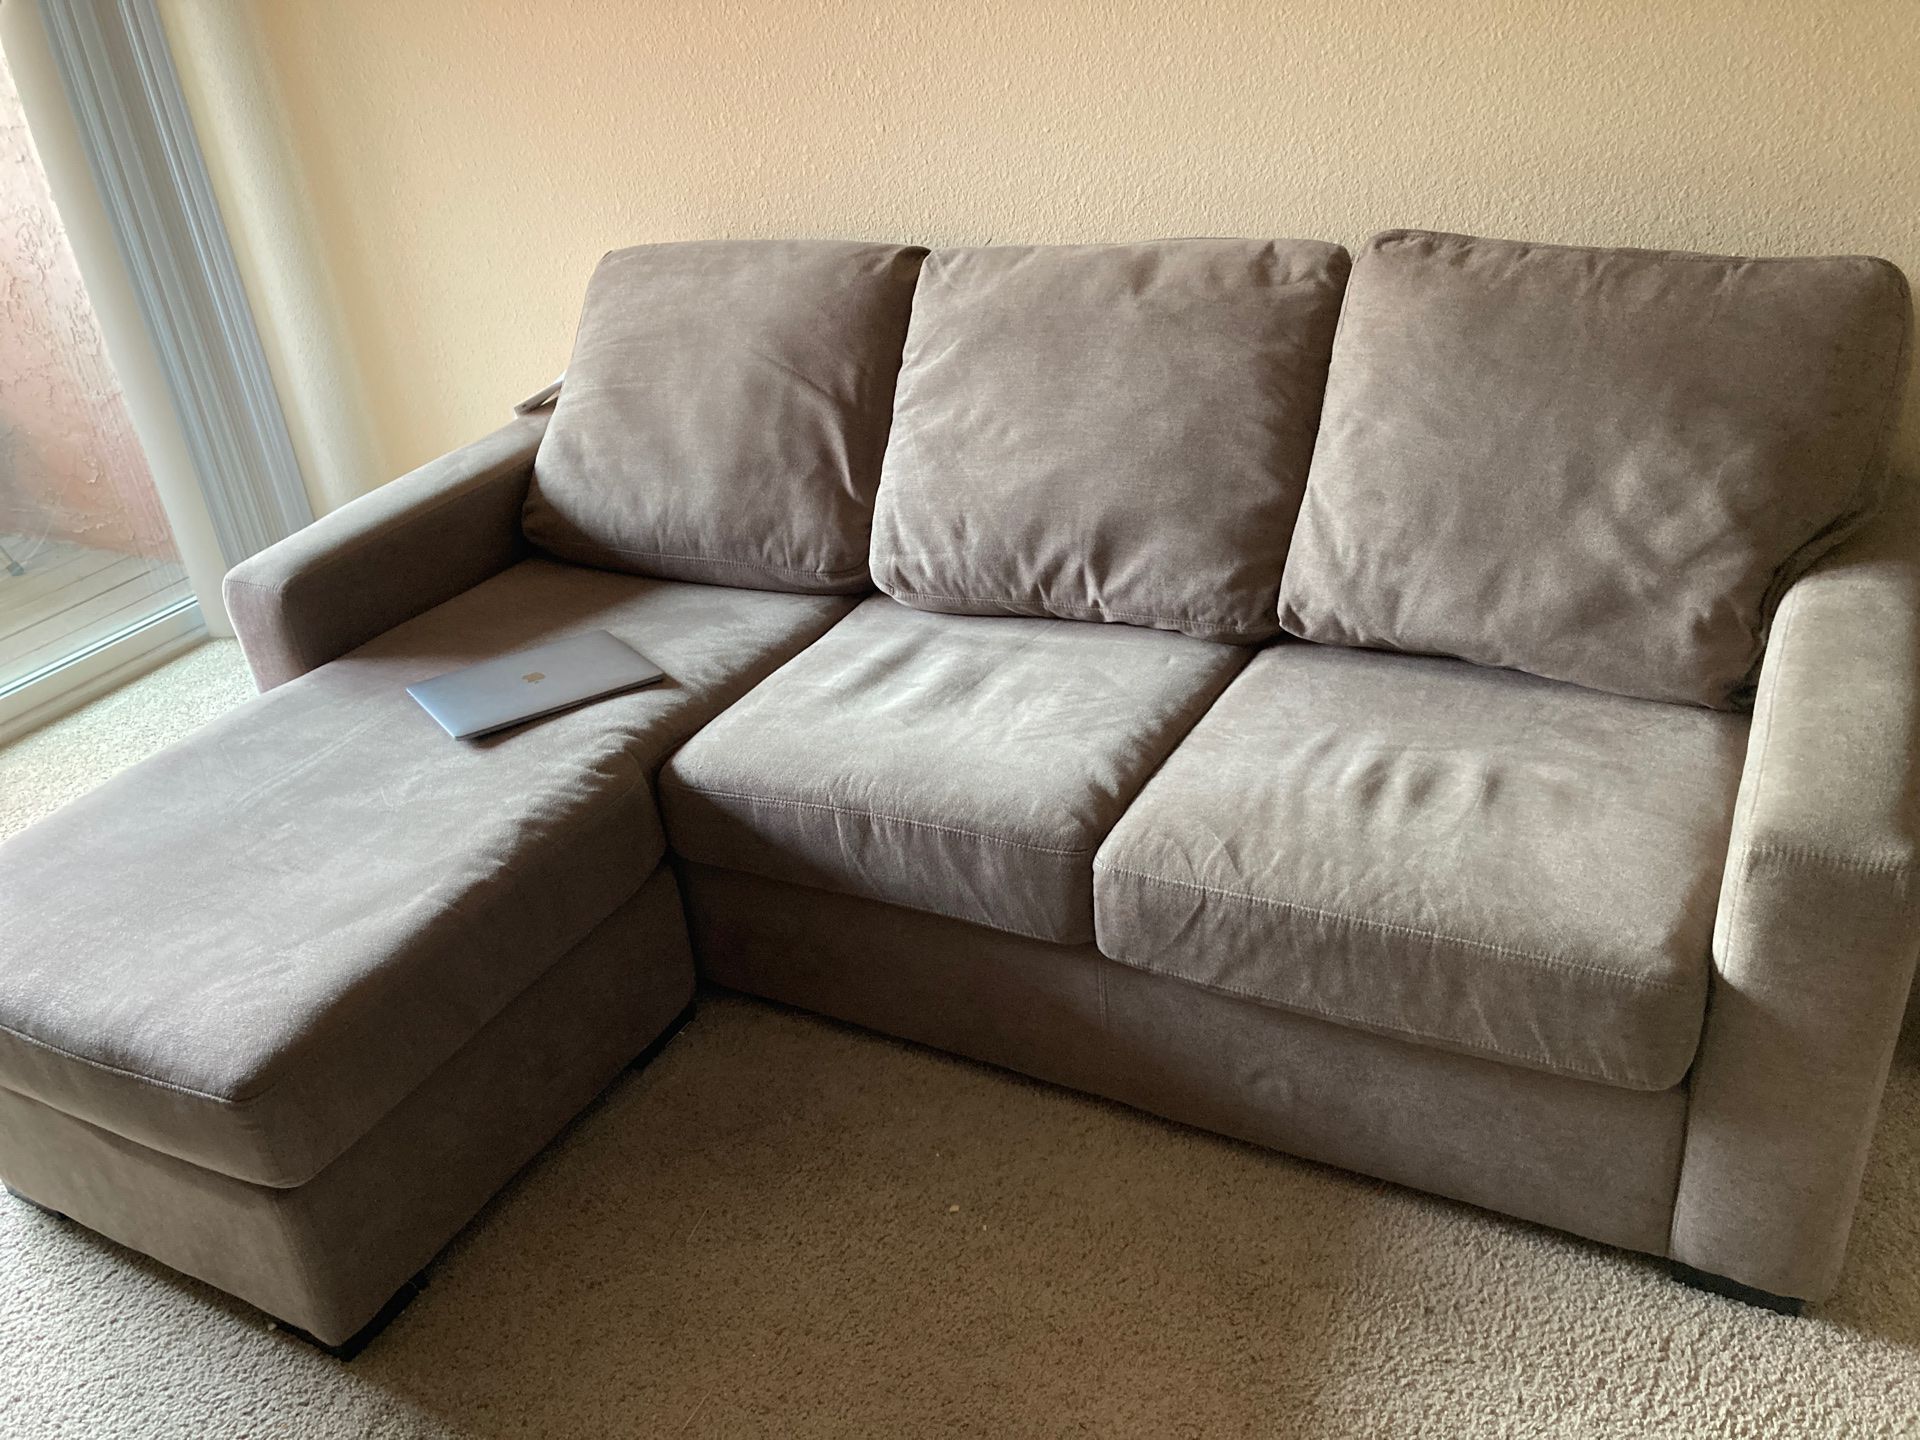 Like new sectional couch - $199